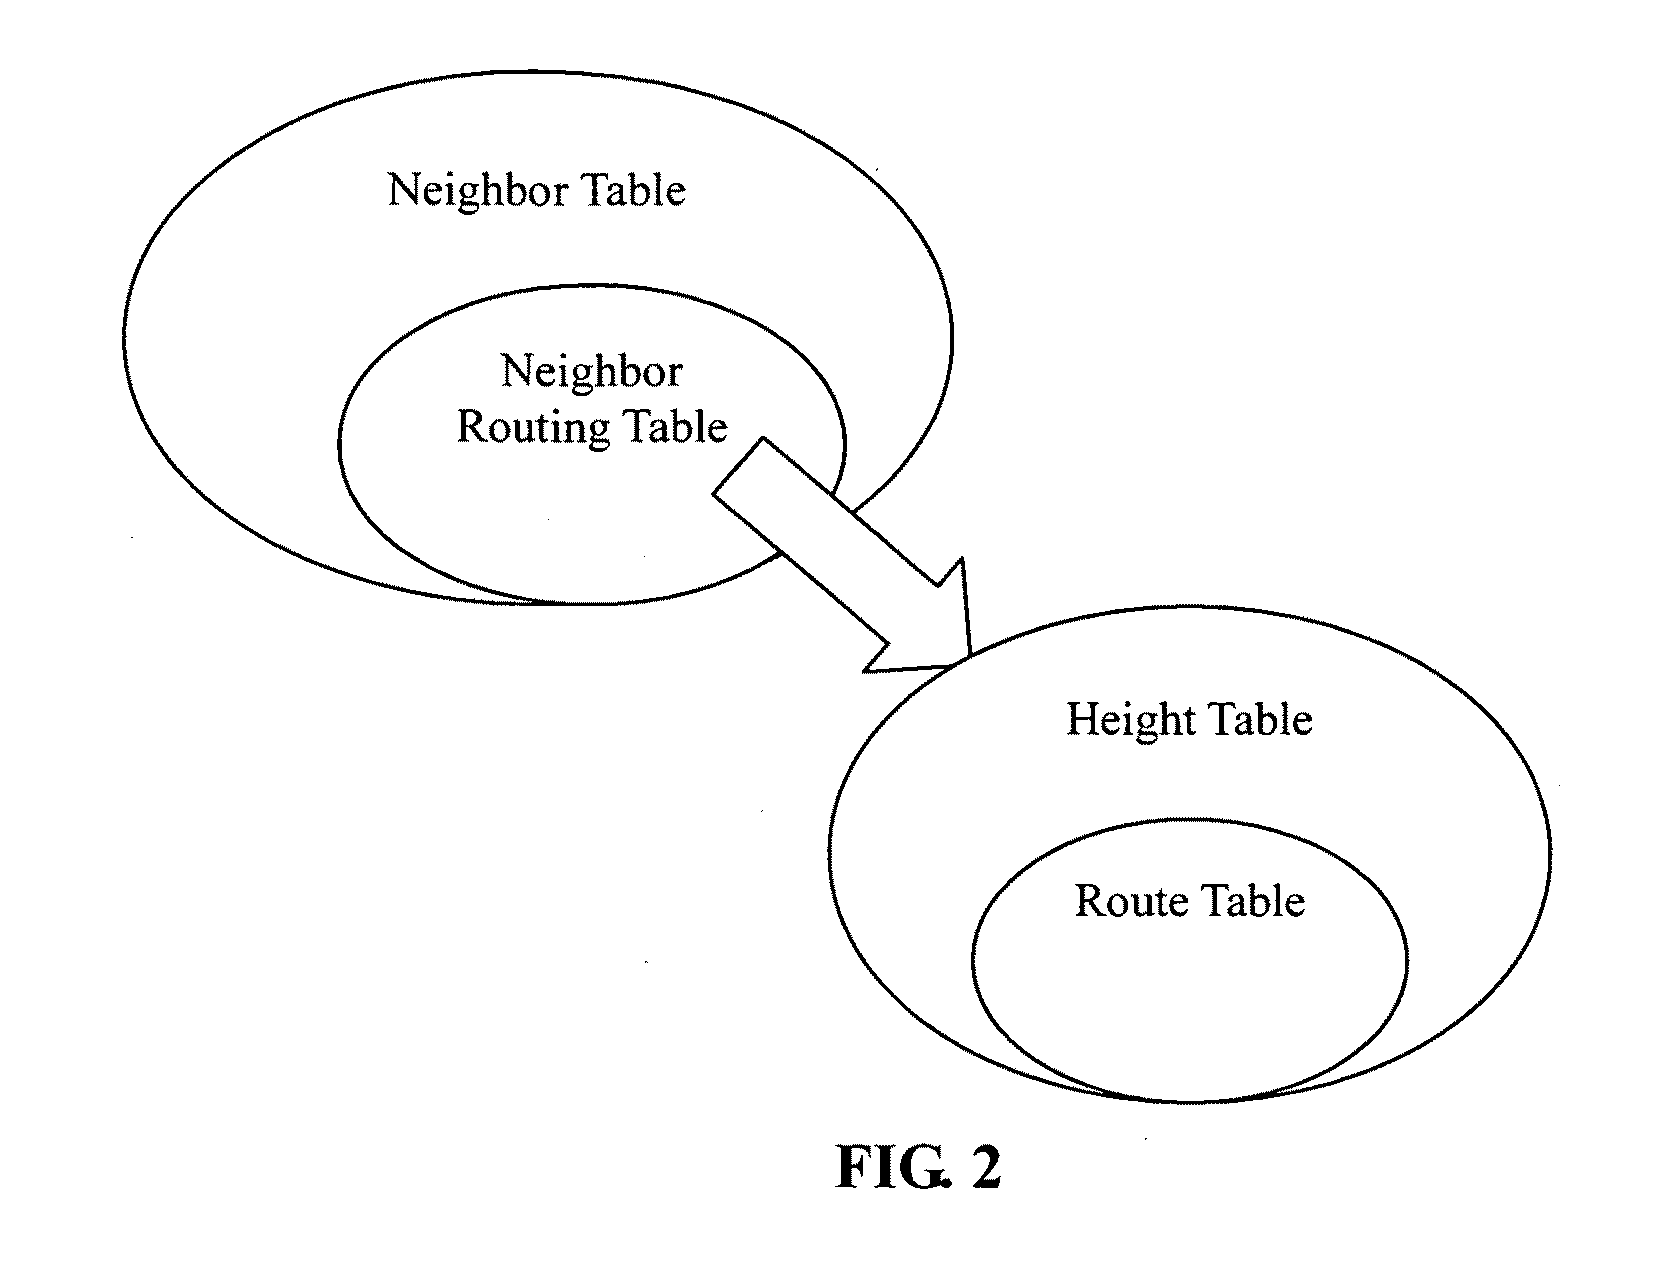 Methods for supporting rapid network topology changes with low overhead costs and devices of the same